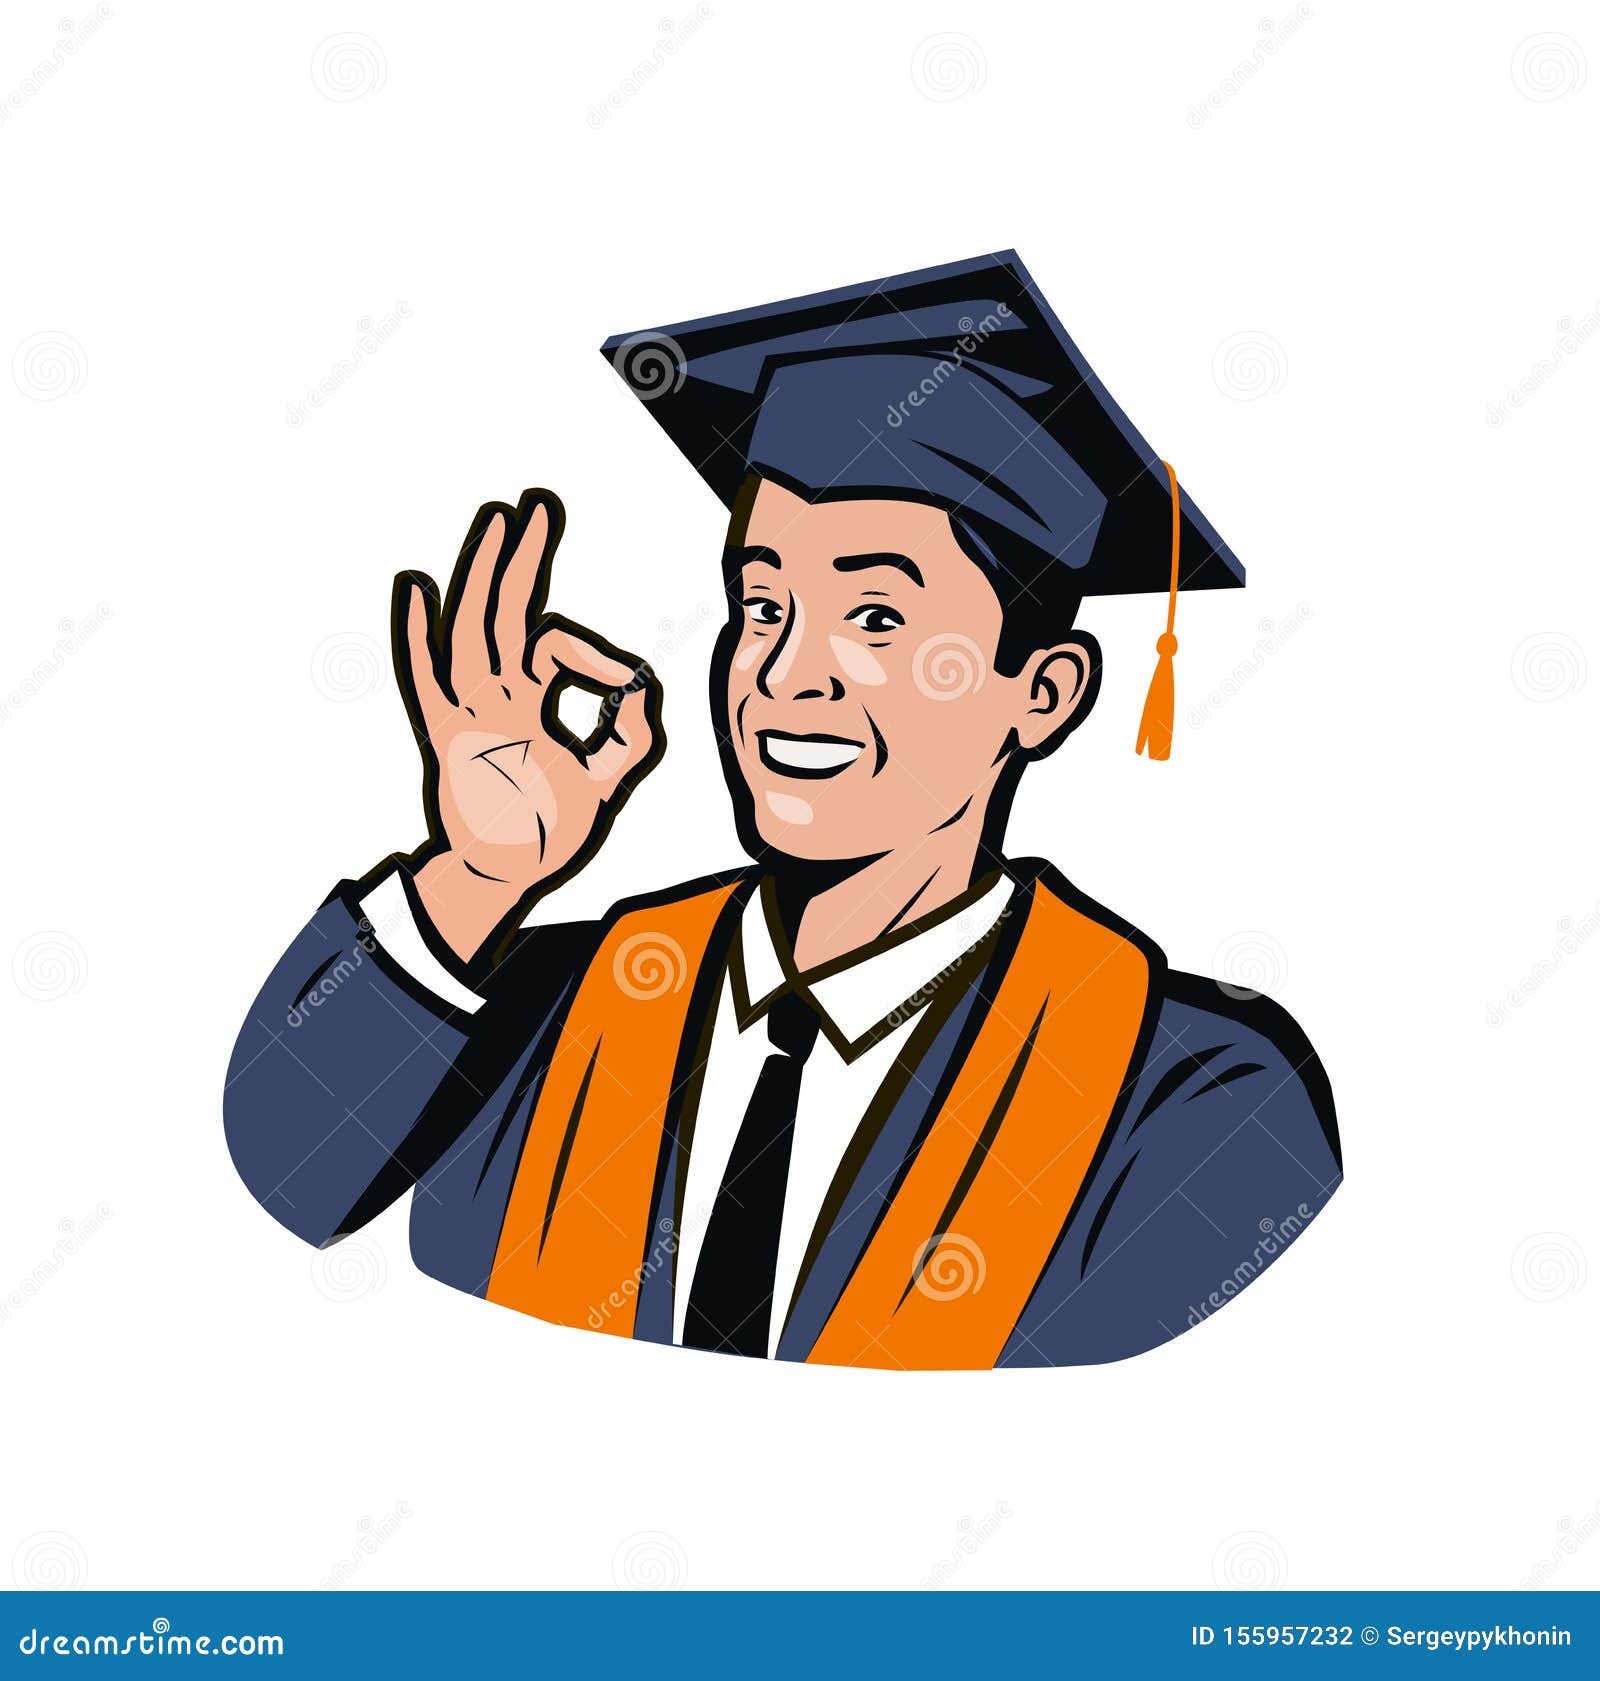 Graduation Men Stock Photos and Pictures - 123,973 Images | Shutterstock